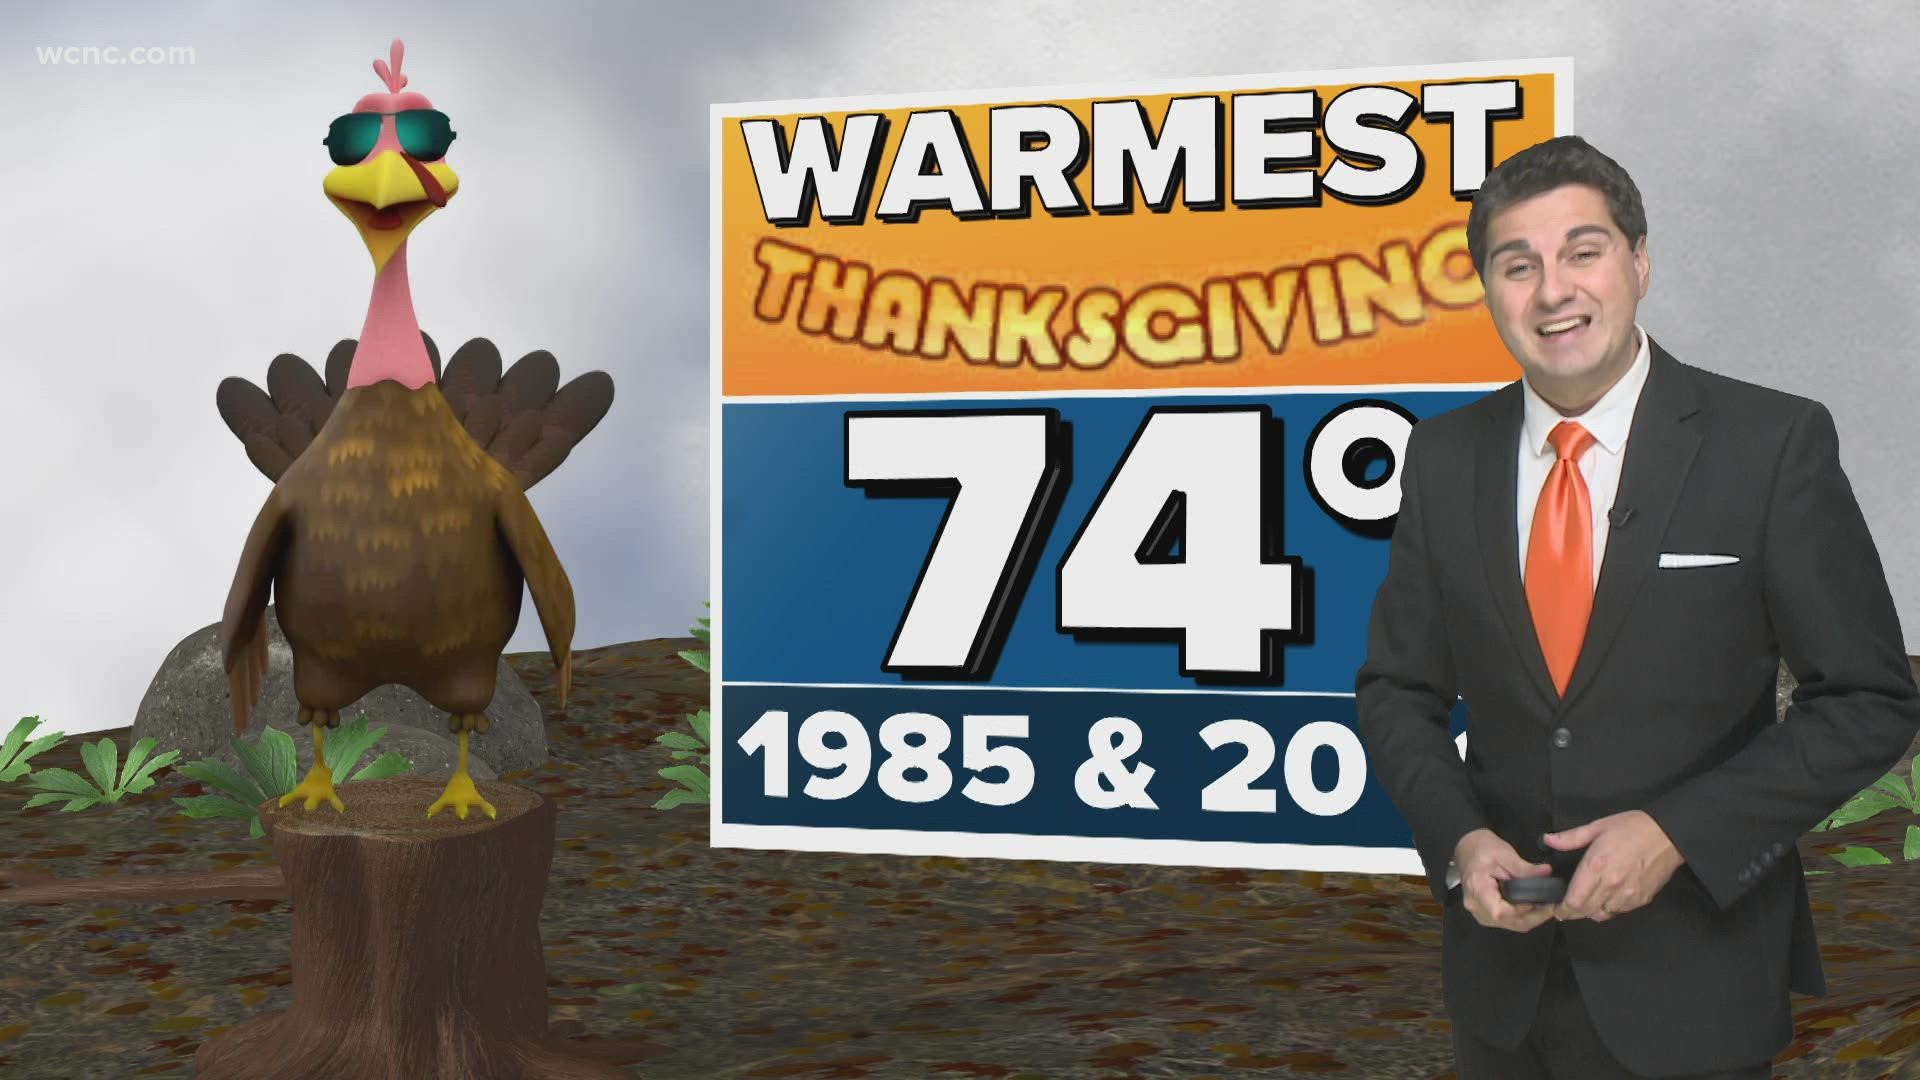 This Thanksgiving will be one of the best days of the week with a slight chance for rain when many of us are sleeping.